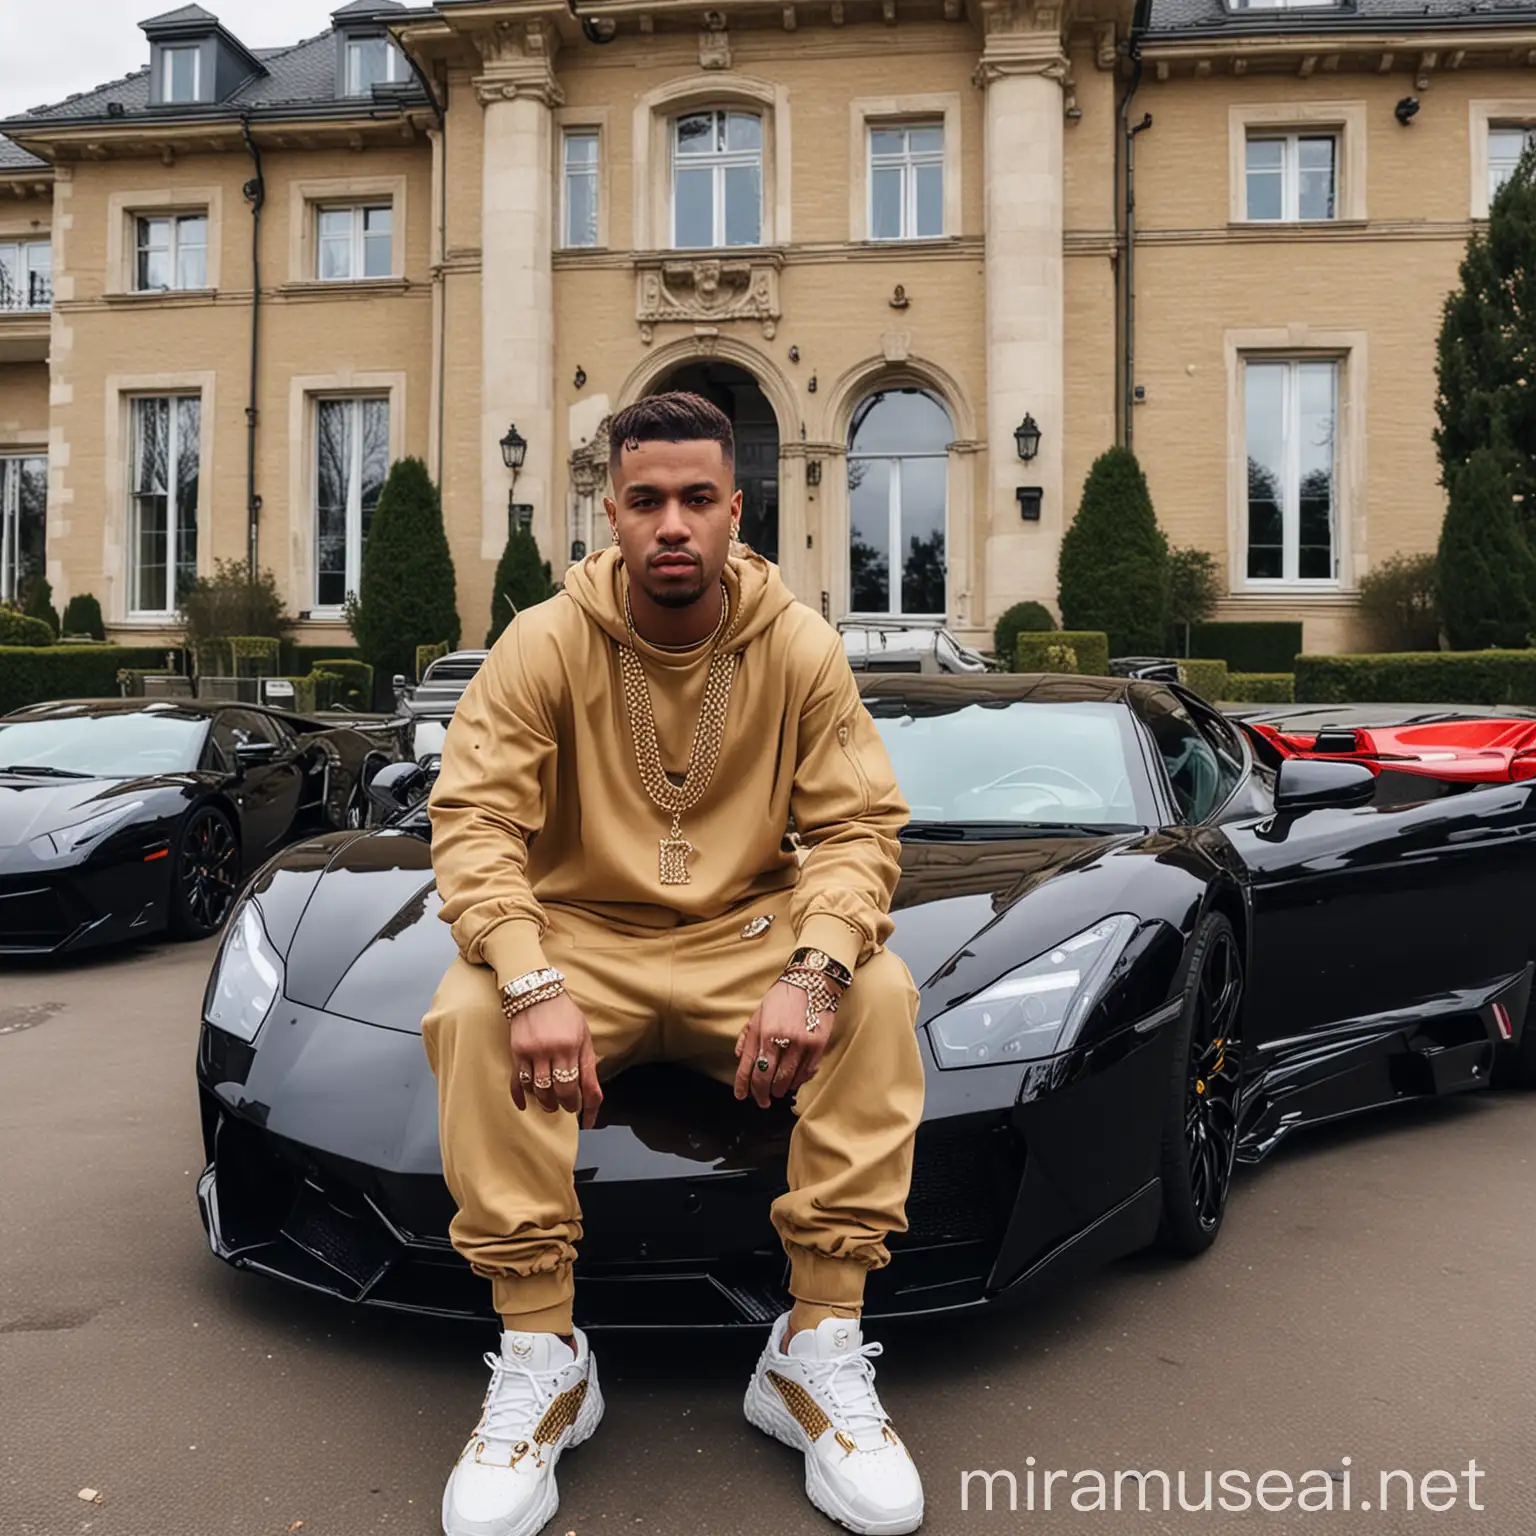 Luxurious Belgian Rapper Posing with Jewelry Outside Lavish Mansion and Supercars